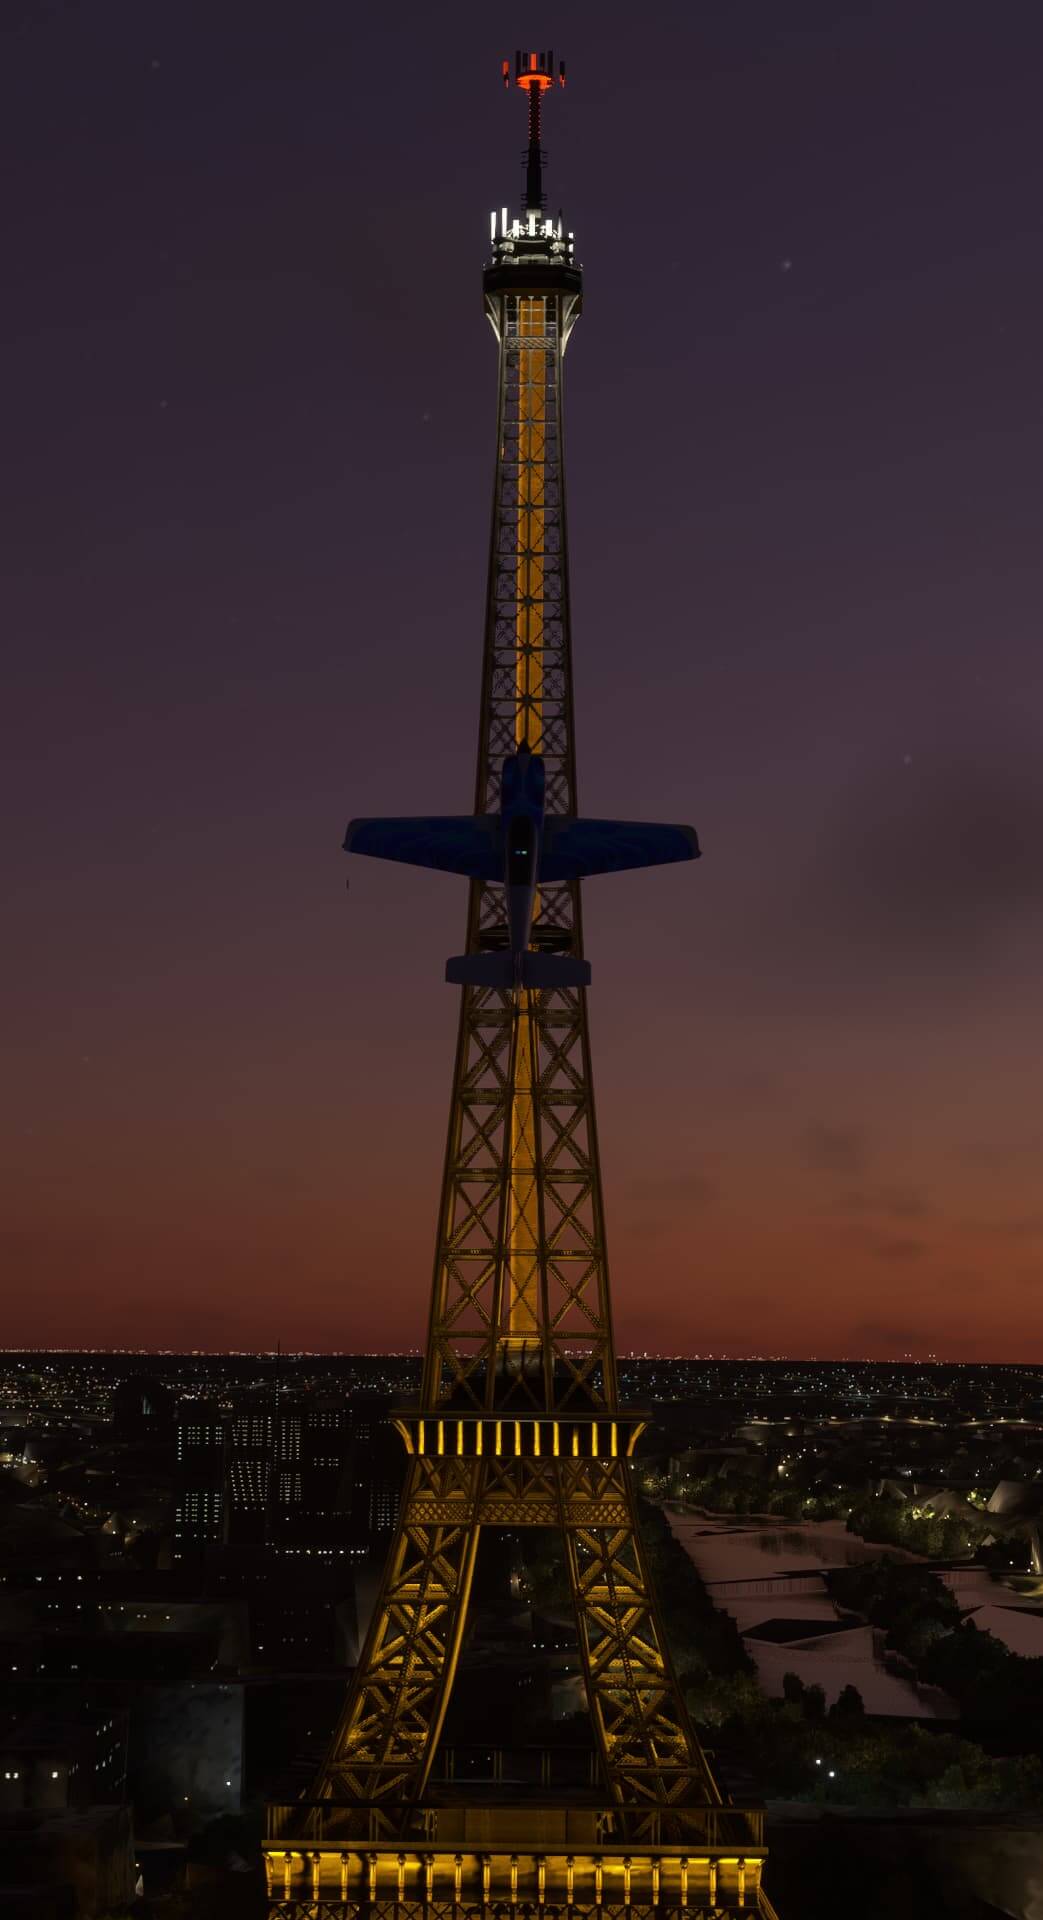 An Extra 300 aerobatic aircraft pulls up into the verticle with perfect alignment against the Eiffel Tower in the background.